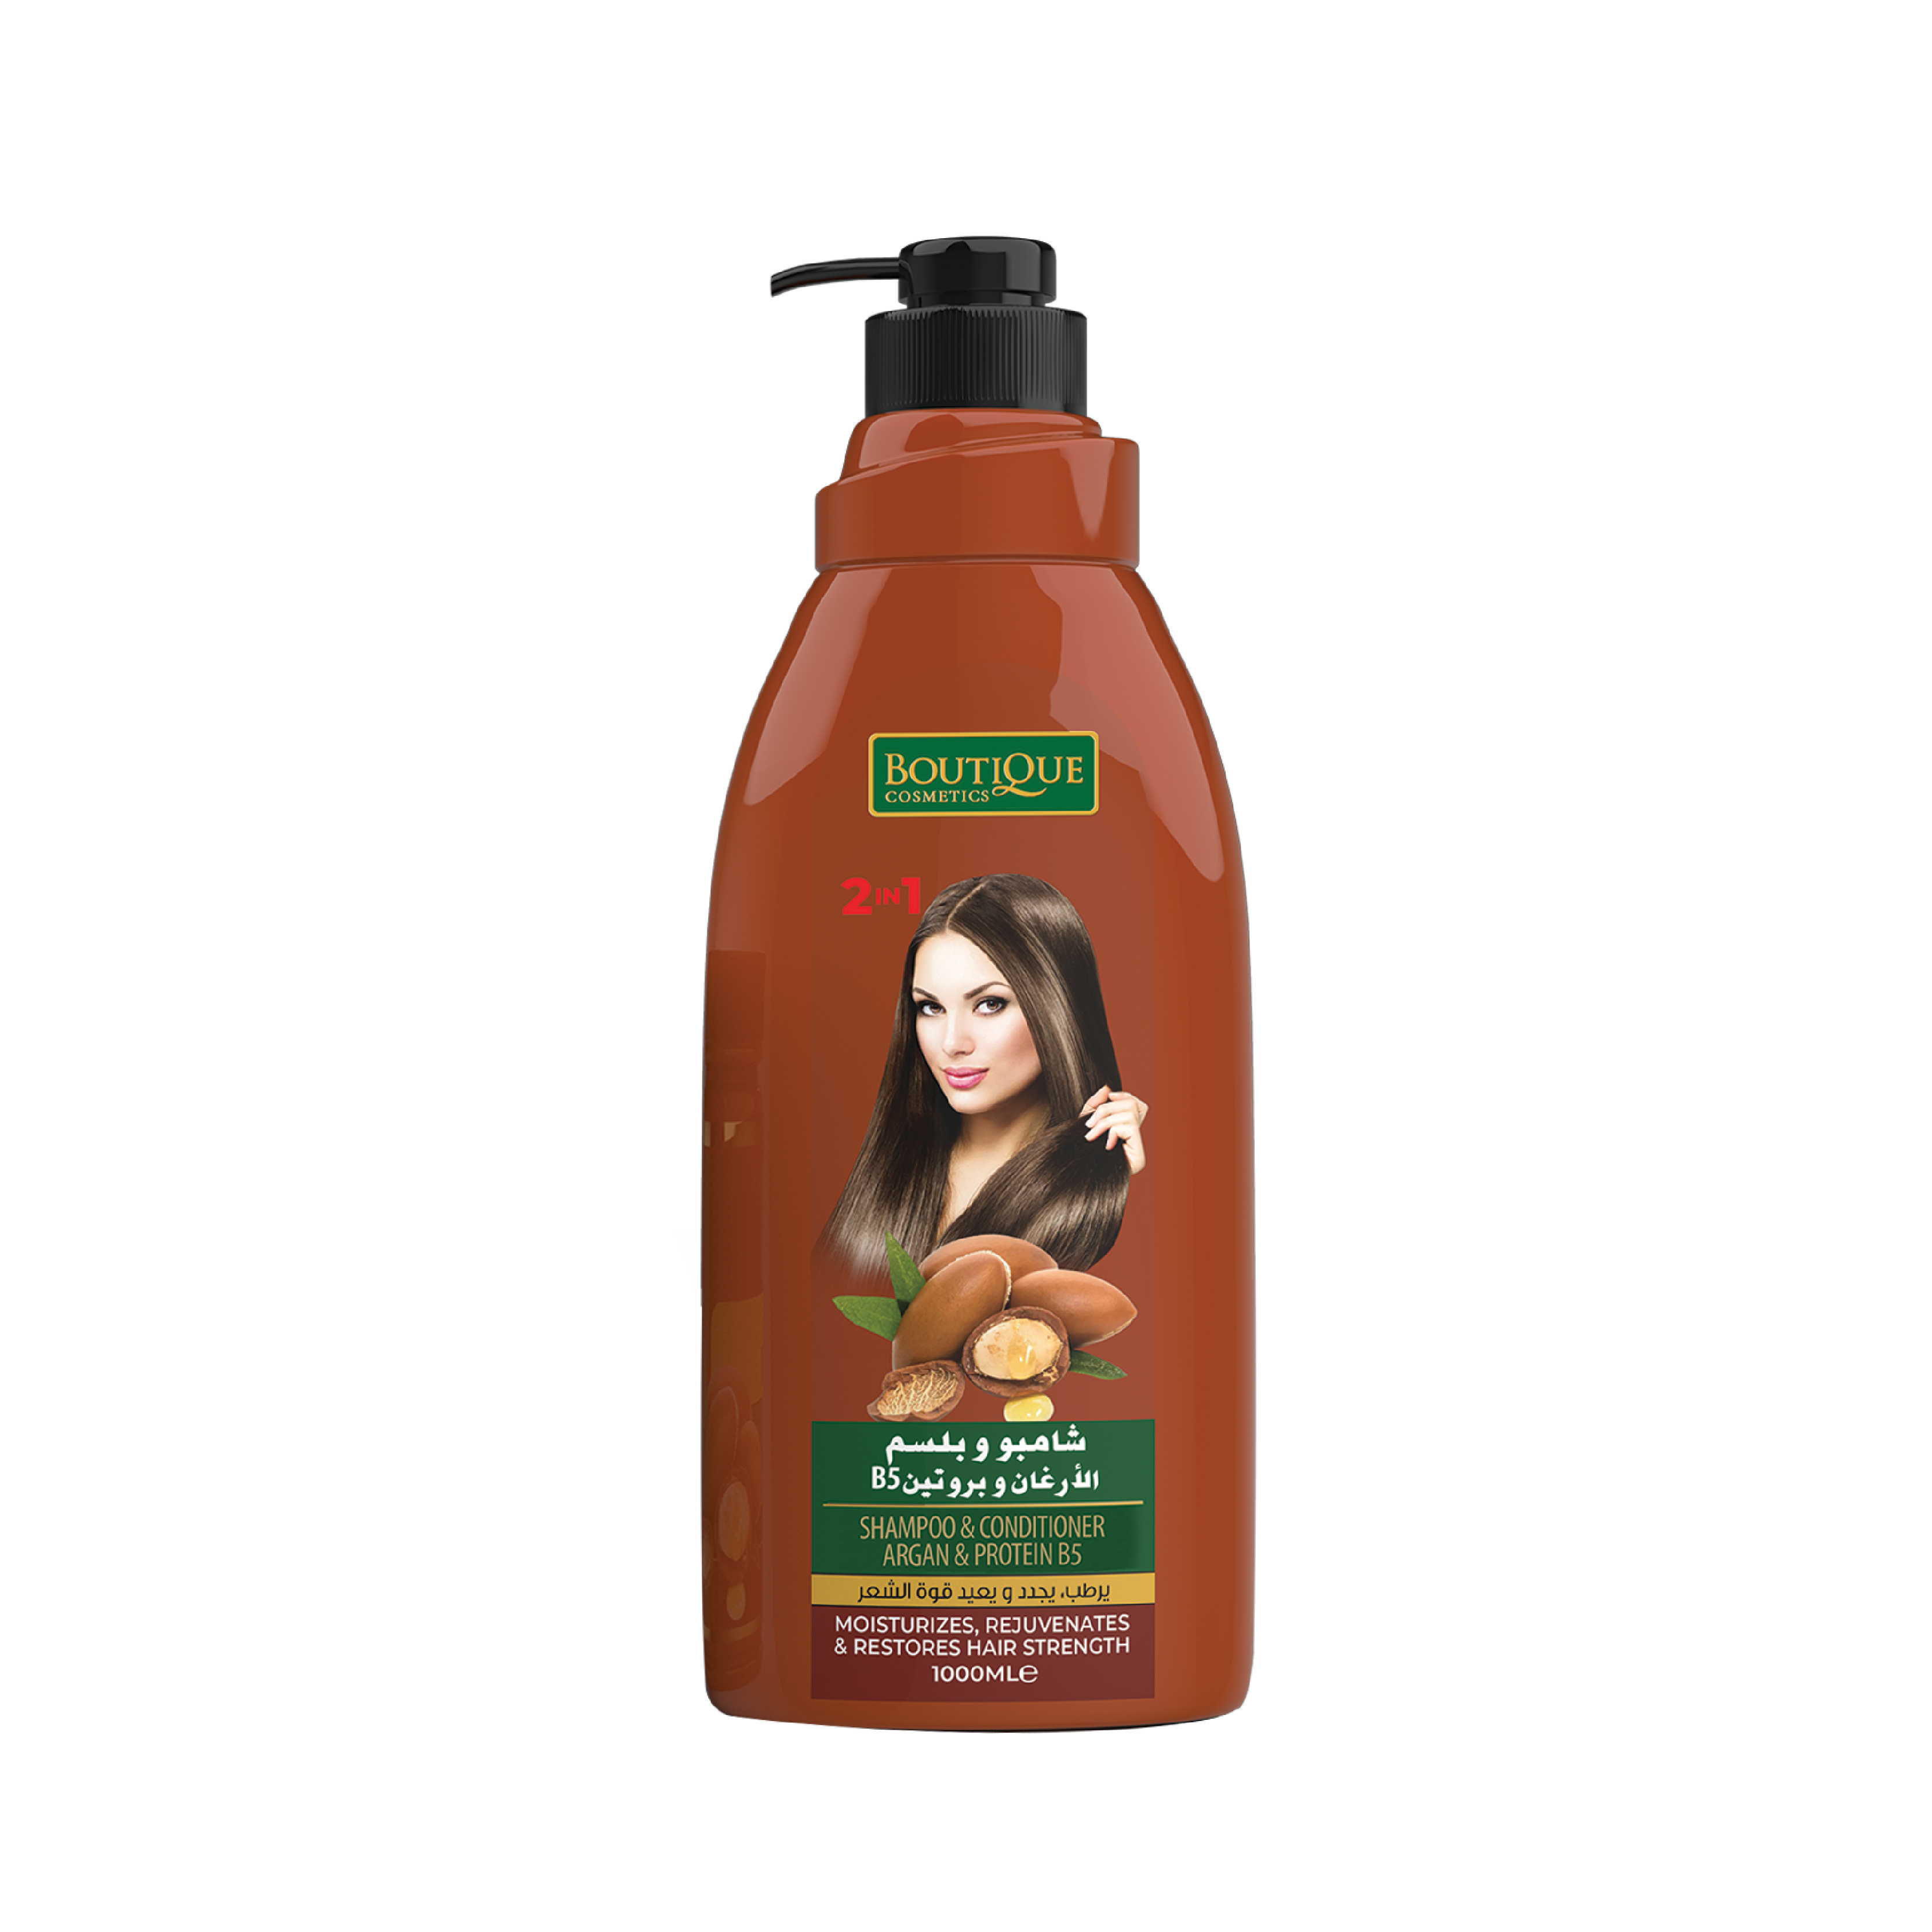 Hydrating Argan & Protein B5 Haircare Duo - 1000ml